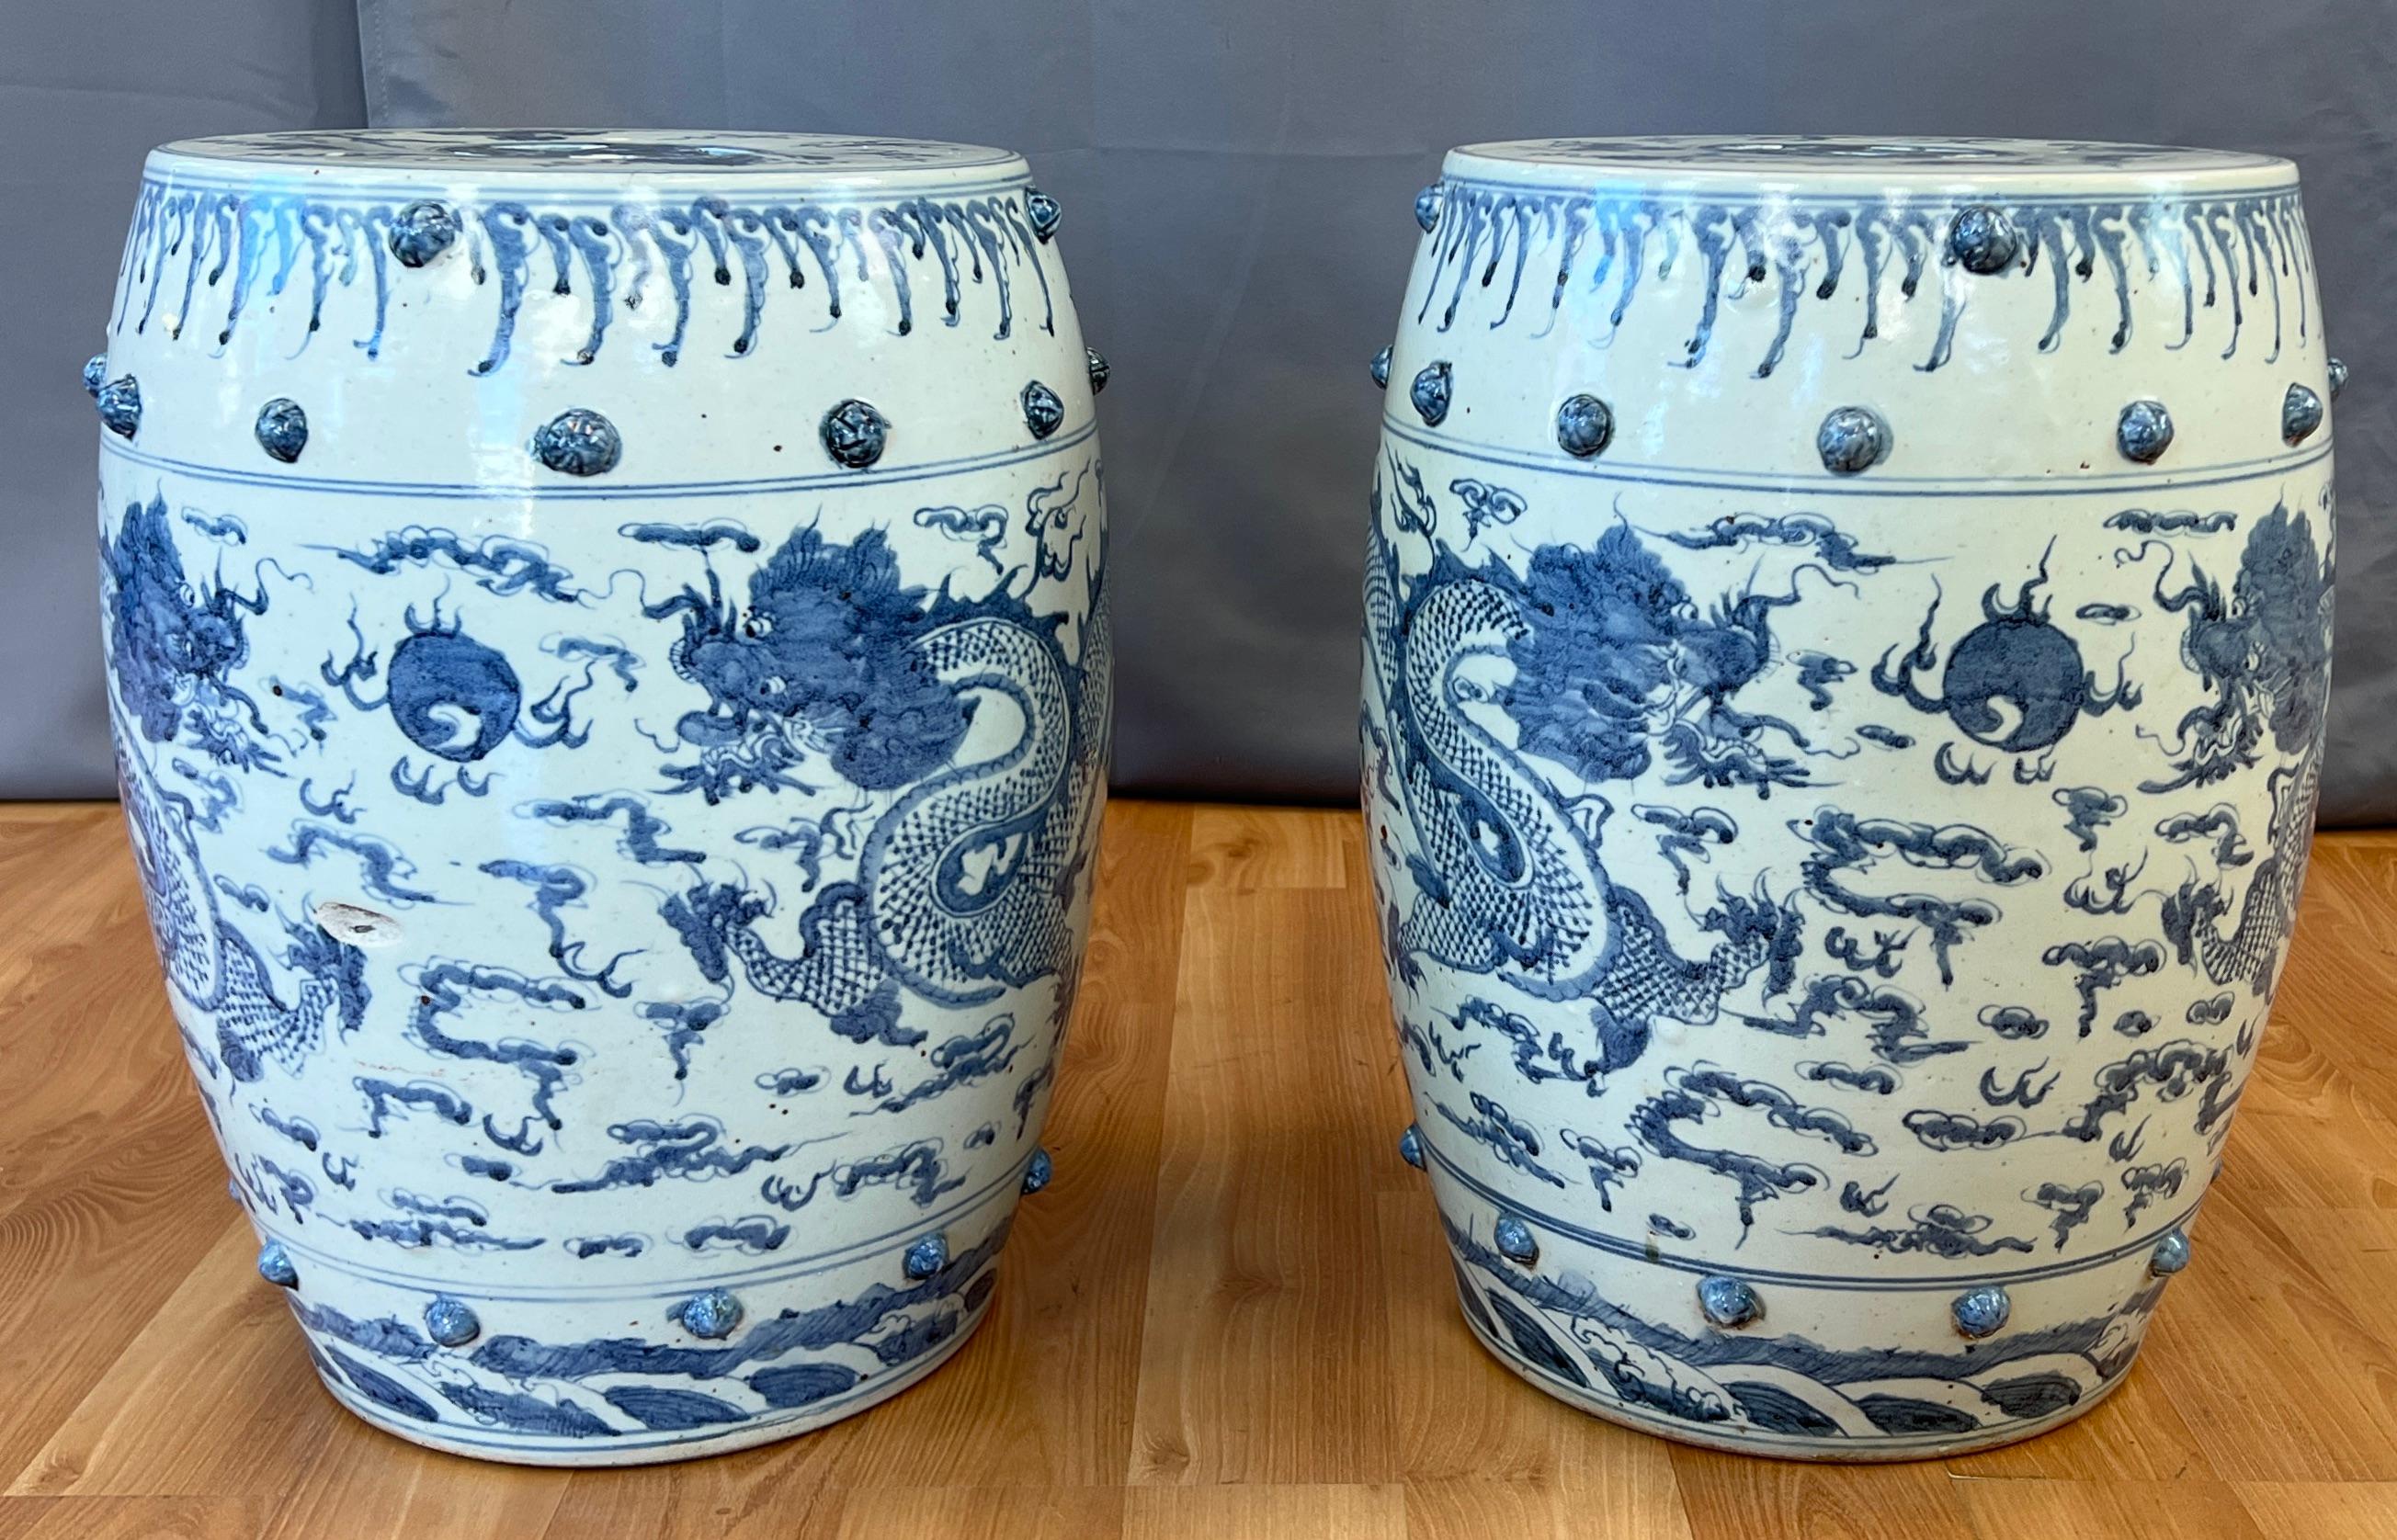 Offered here are a pair of ceramic garden stools, circa 19th century.
Both have a pair of hand painted Blue Dragons design around their sides, sets of raised nubs near their tops and bottoms, then there's the pierced tops of both stools.